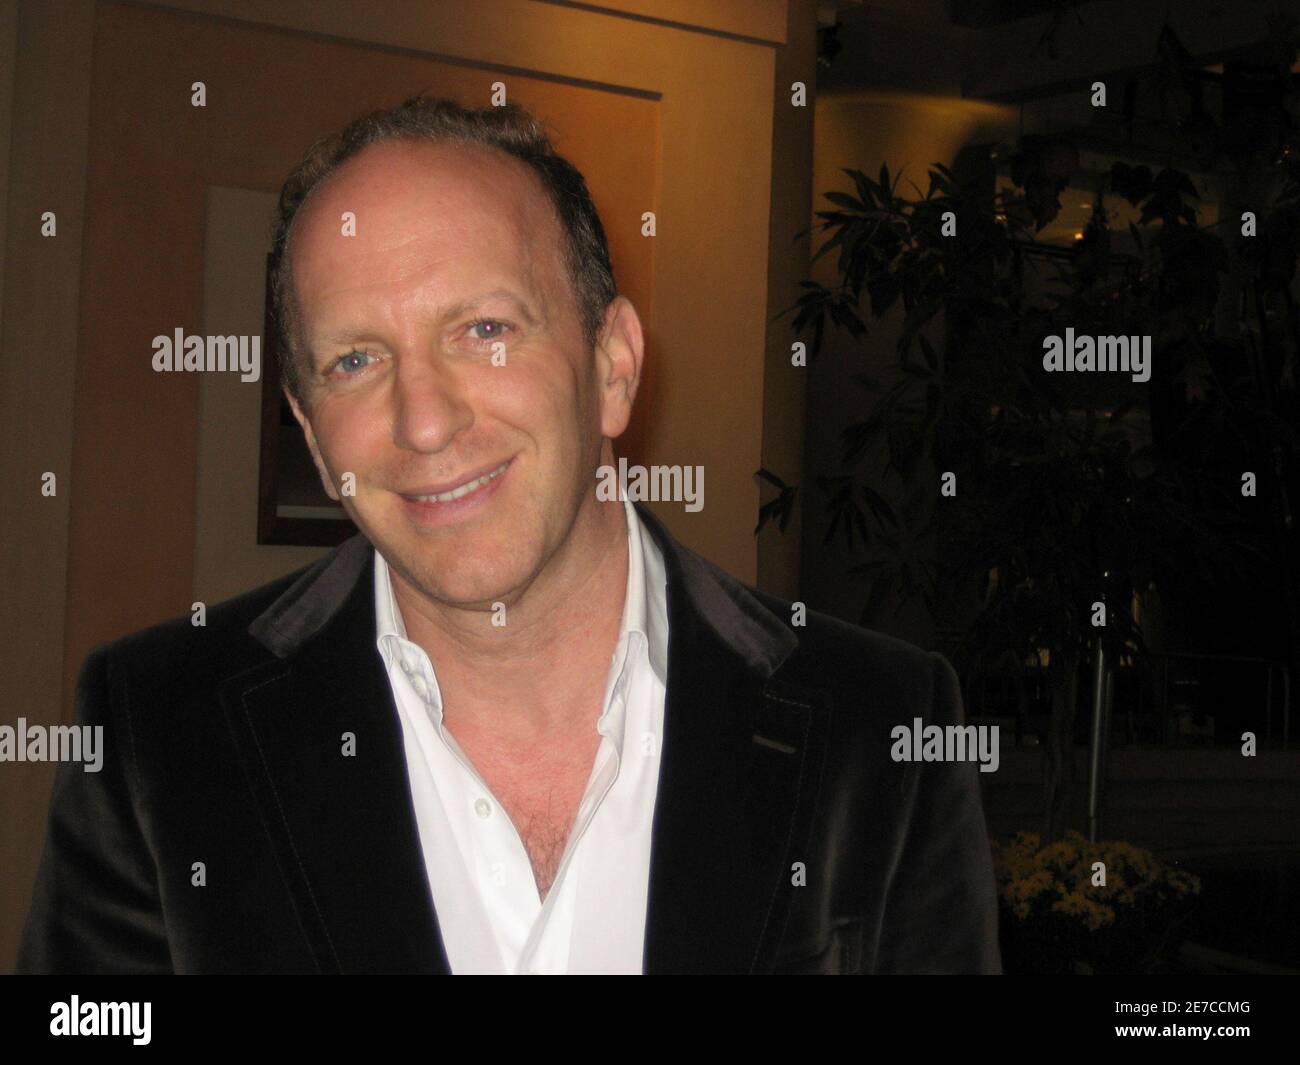 British author Simon Sebag Montefiore poses for a picture at an International Festivals Of Authors (IFOA) party in Toronto, October 29, 2008. Montefiore is well known for biographies and historical works but the critically acclaimed writer has now turned to fiction with a new book set in 20th century Russia. The author of 'Young Stalin, Stalin: The Court of the Red Tsar,' which is being made into a film, and 'Catherine the Great & Potemkin' has just launched his first novel 'sashenka,' an intimate family story about a woman and her children.  Picture taken October 29, 2008.  To match Reuters L Stock Photo